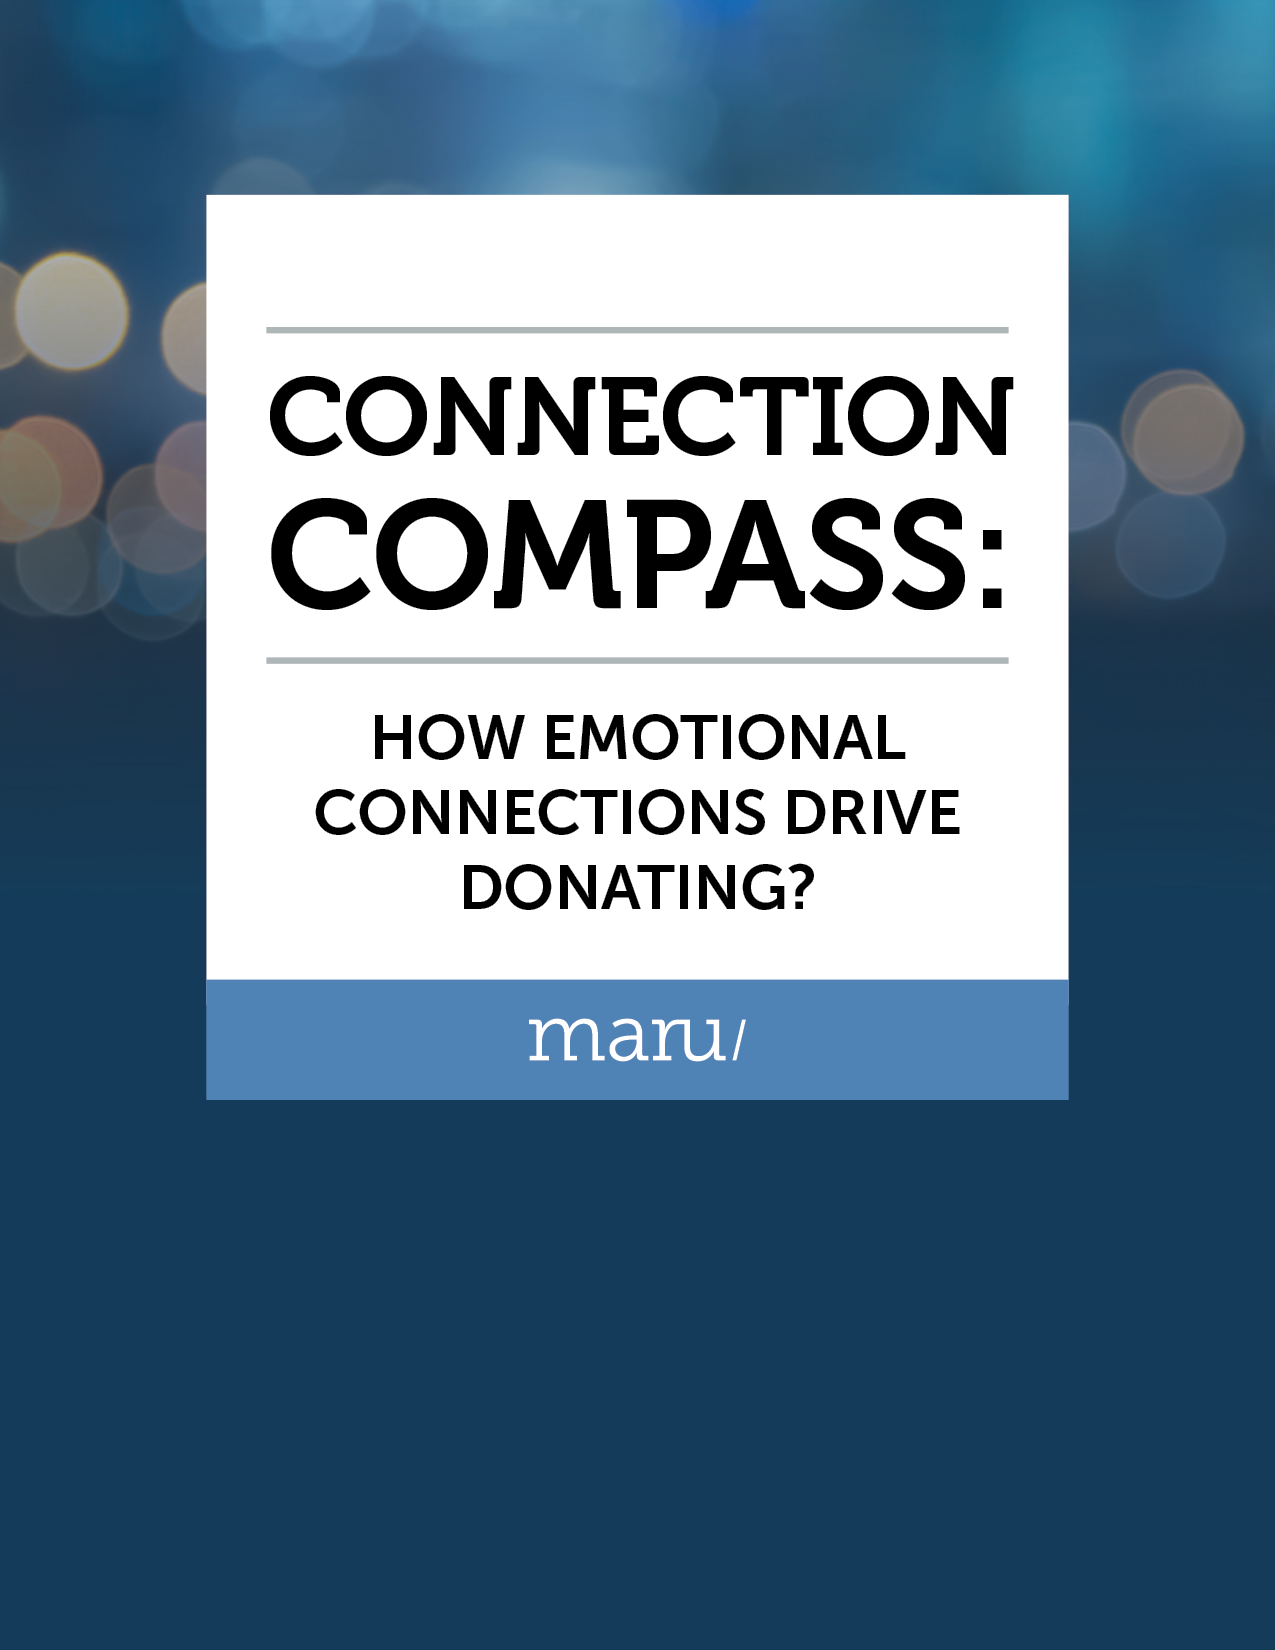 101_maru_whitepaper_covers-connectioncompass_v3_mar9_2021.png